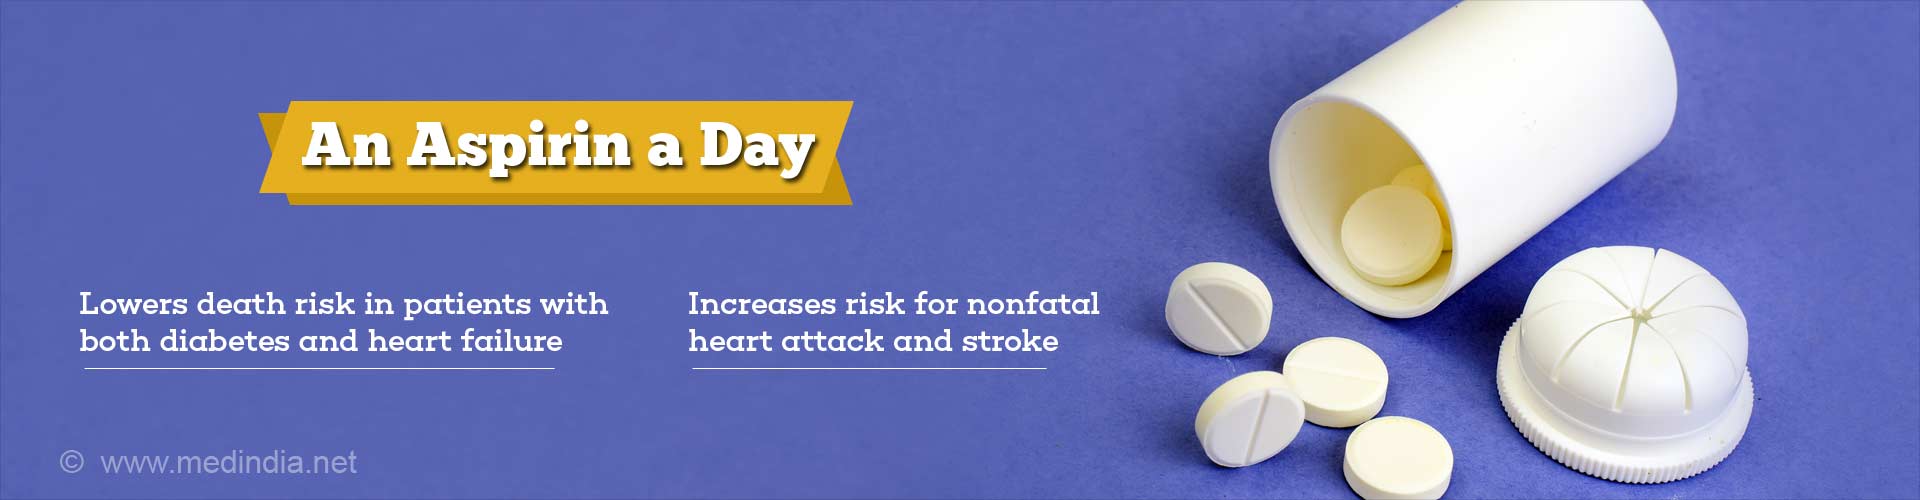 an aspirin a day
- lowers death risk in patients with both diabetes and heart failure
- increases risk for non-fatal heart attack and stroke